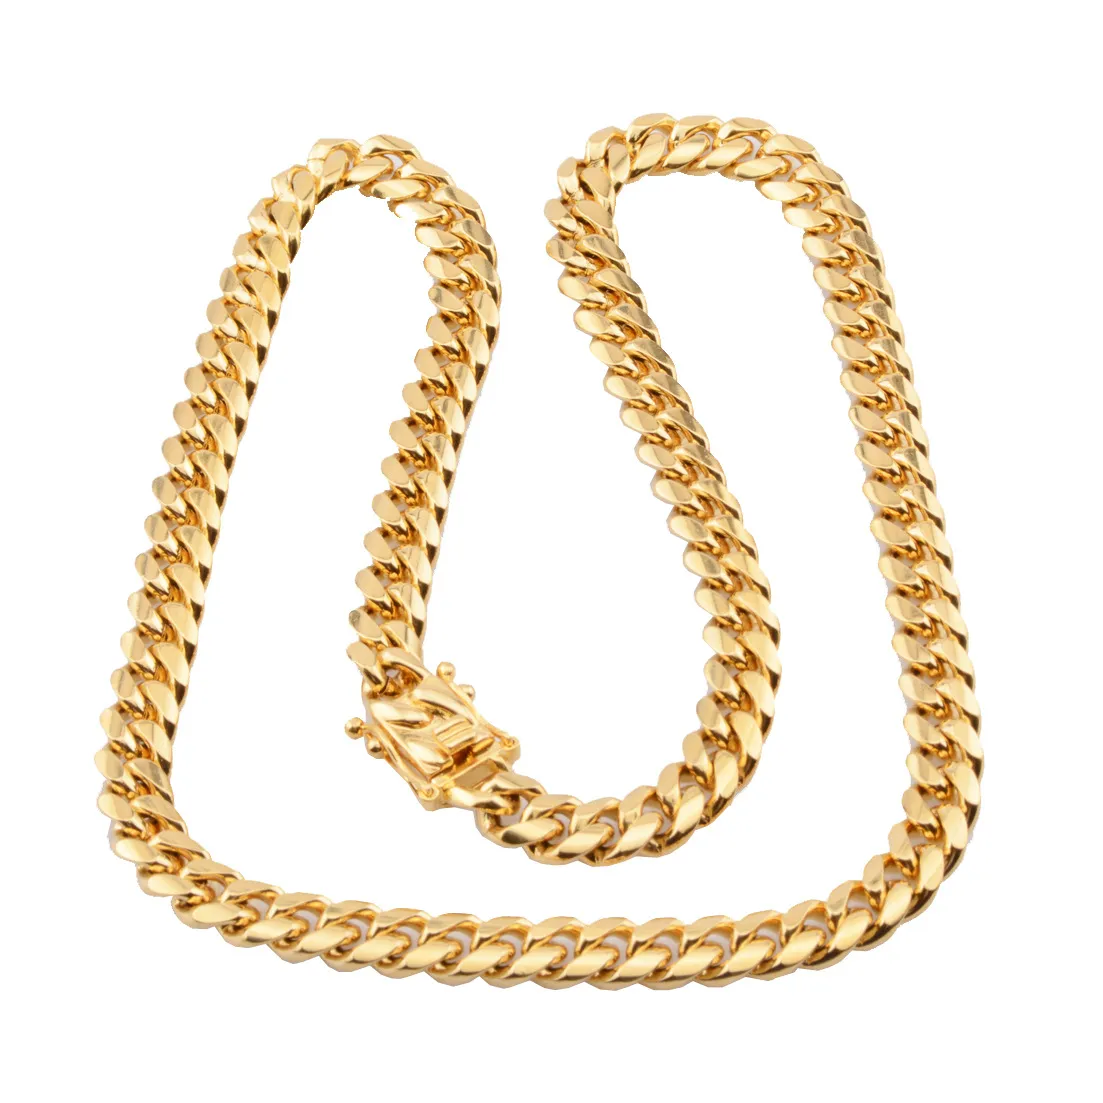 8mm 10mm 12mm 14mm 16mm Miami Cuban Link Chains Stainless Steel Mens 14K Gold Chains High Polished Punk Curb Necklaces308s